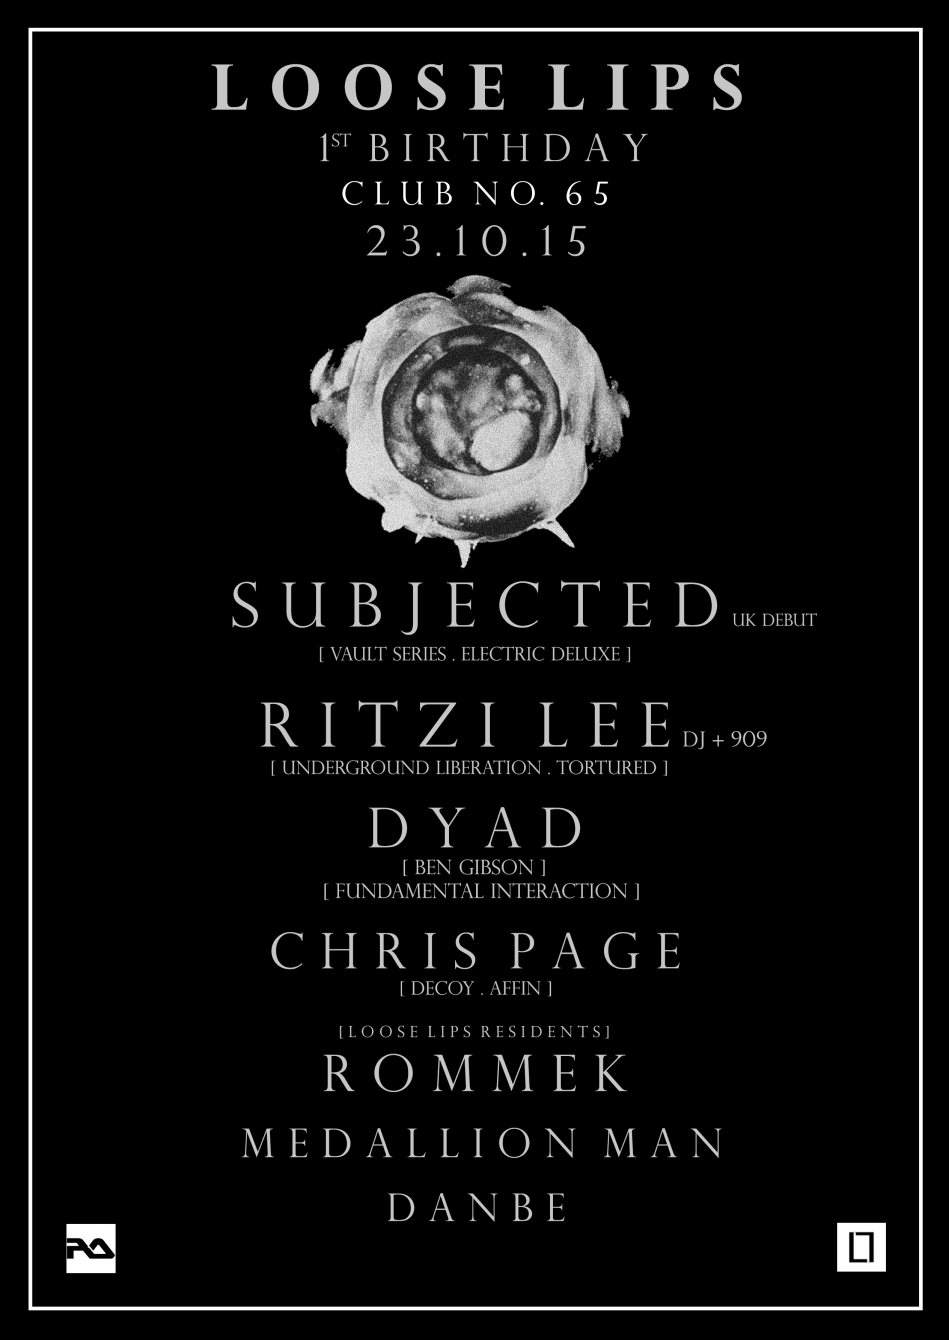 Loose Lips 1st Birthday - Subjected (UK Debut), Ritzi Lee + 909, Dyad, Chris Page & More - フライヤー表